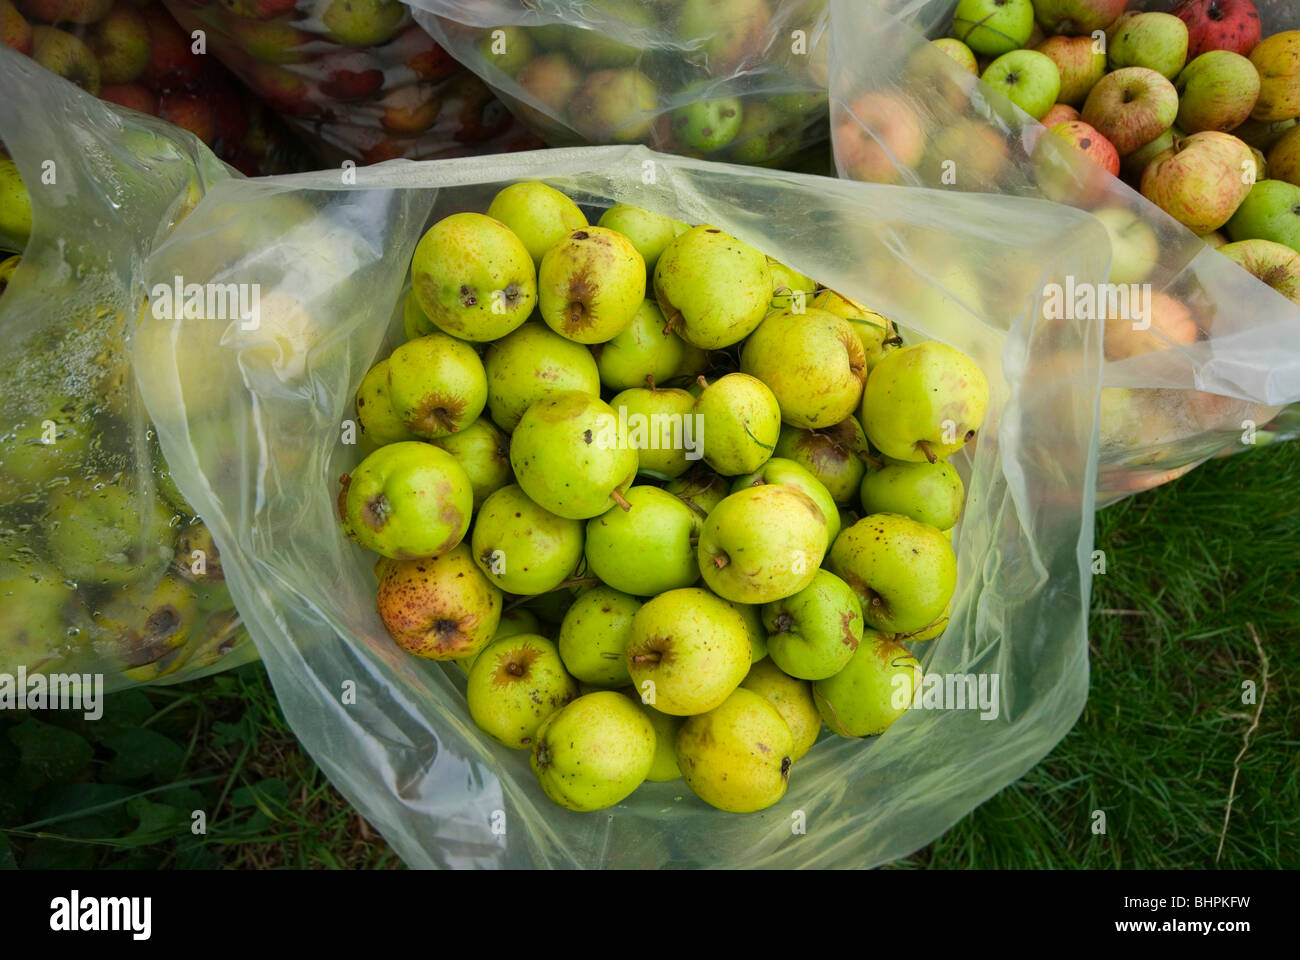 https://c8.alamy.com/comp/BHPKFW/cider-apples-bagged-and-ready-for-collection-BHPKFW.jpg